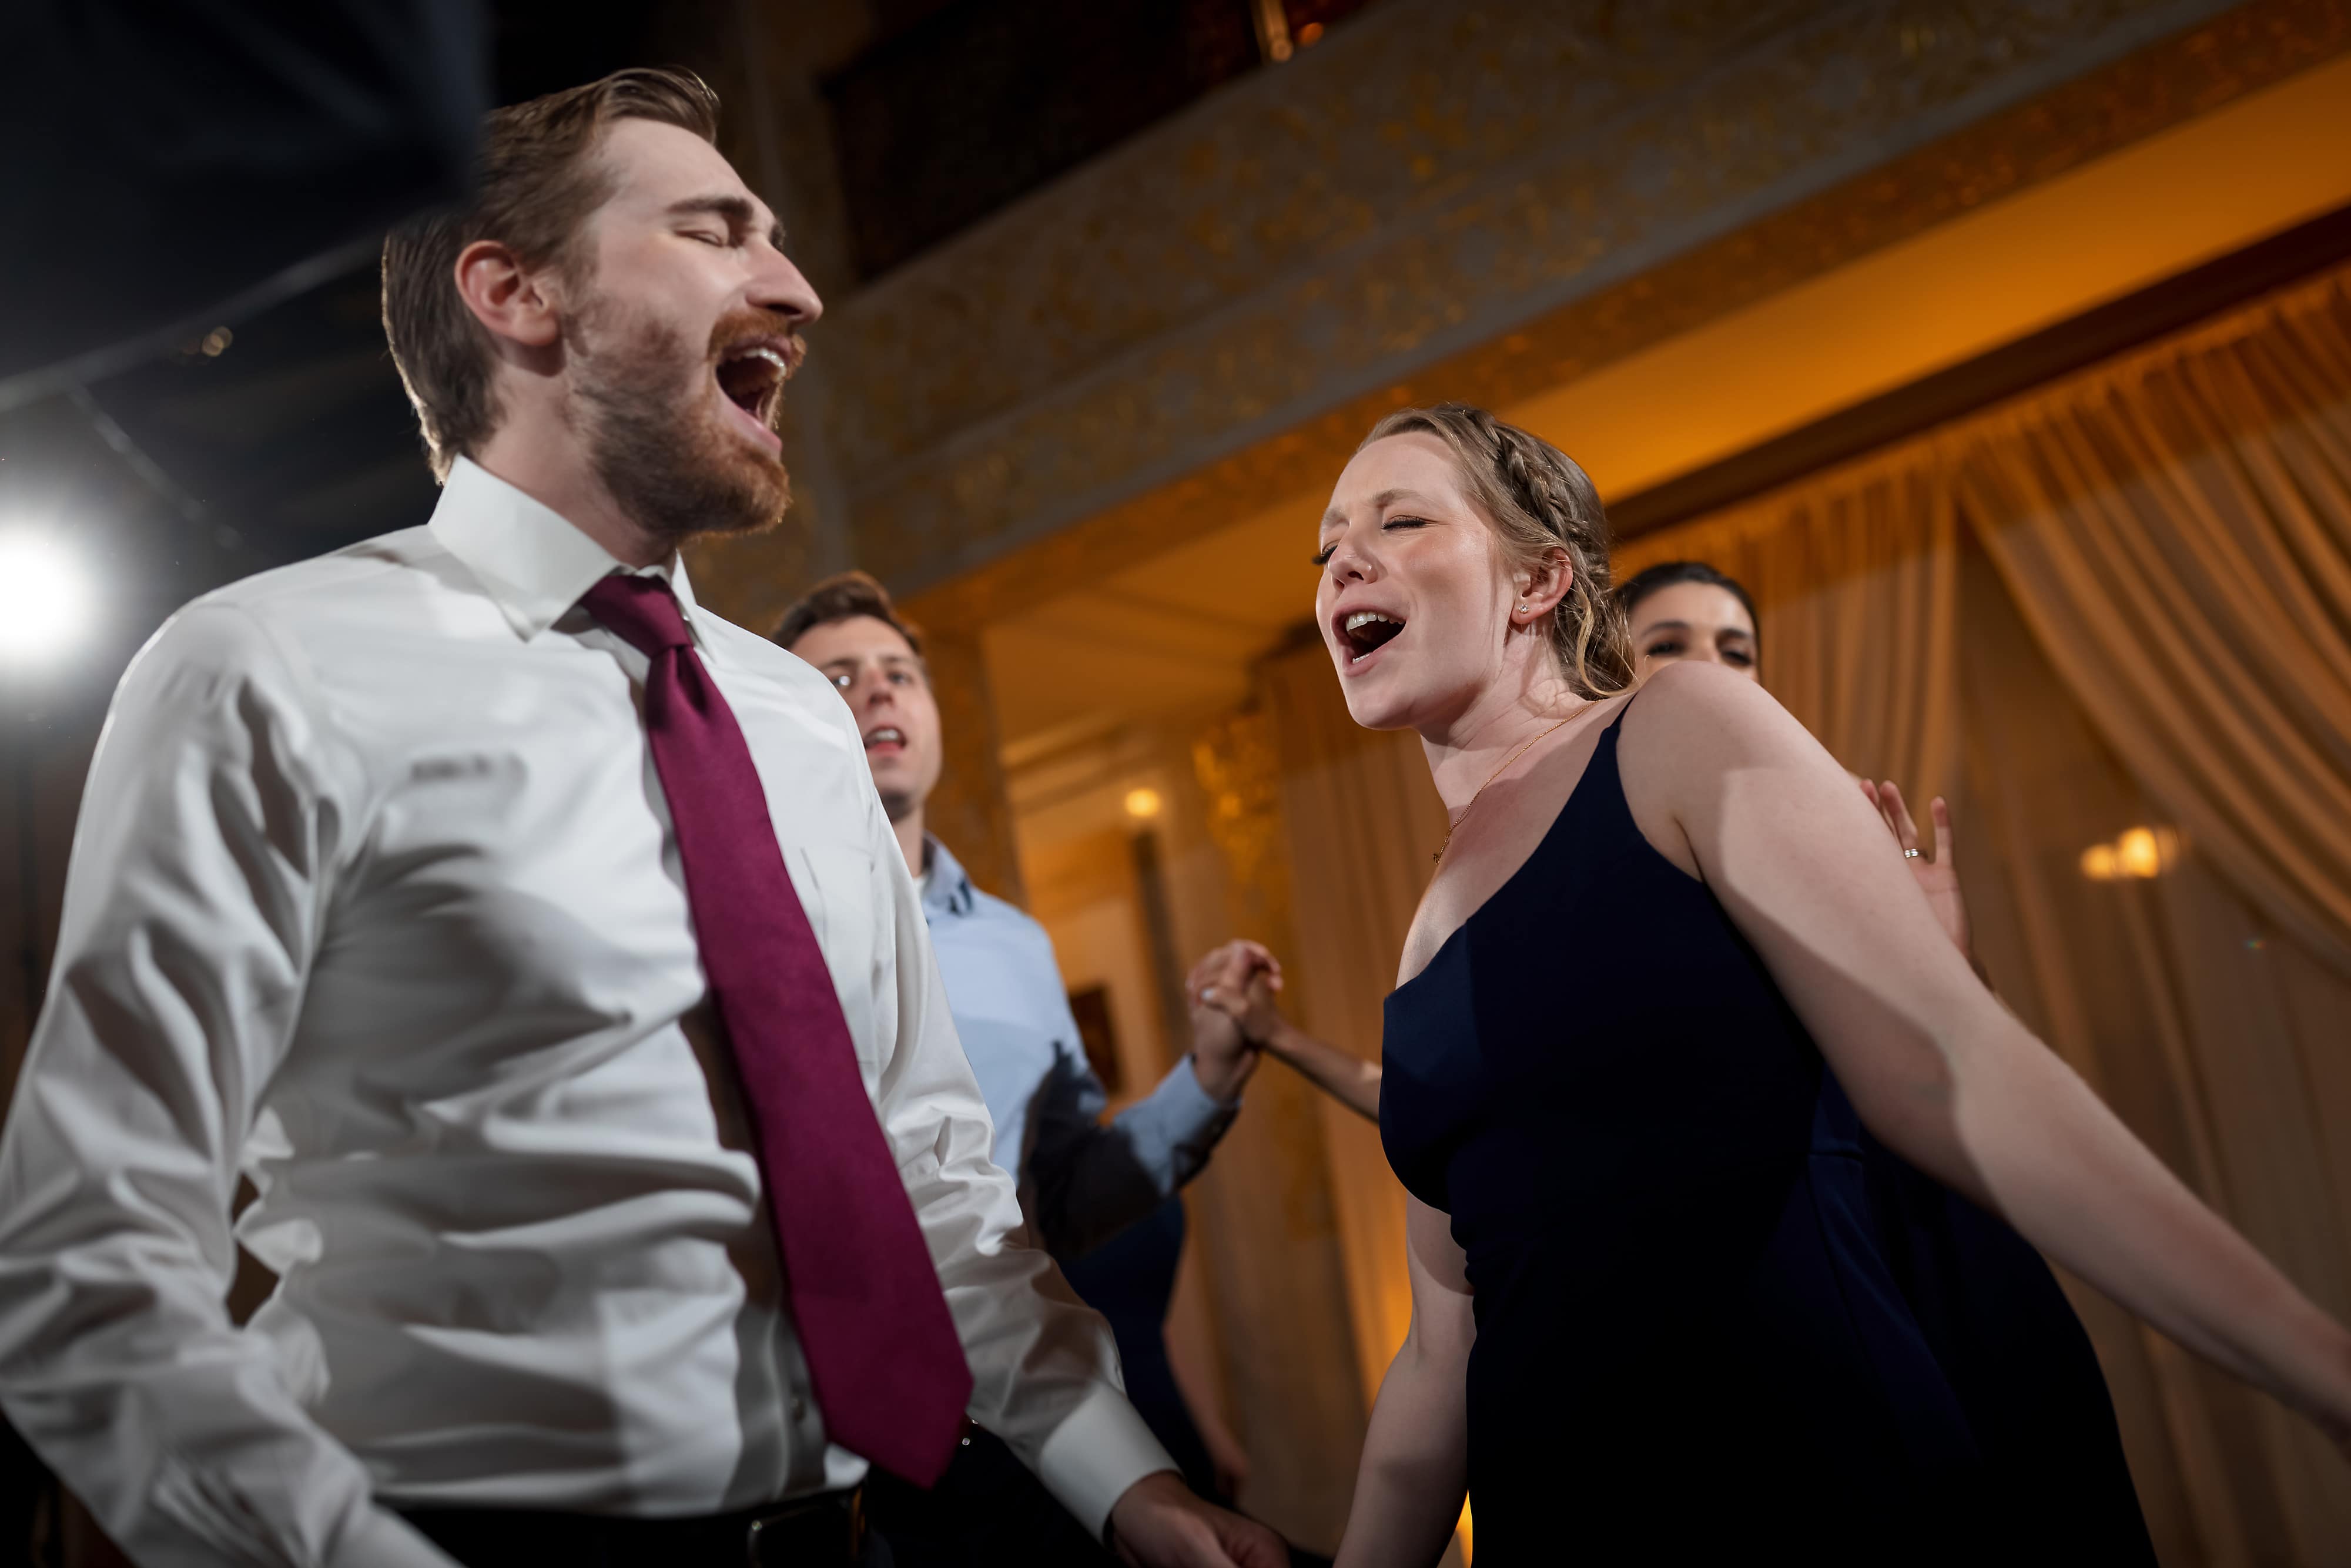 Wedding guests dance during reception at the Rookery Building in Chicago